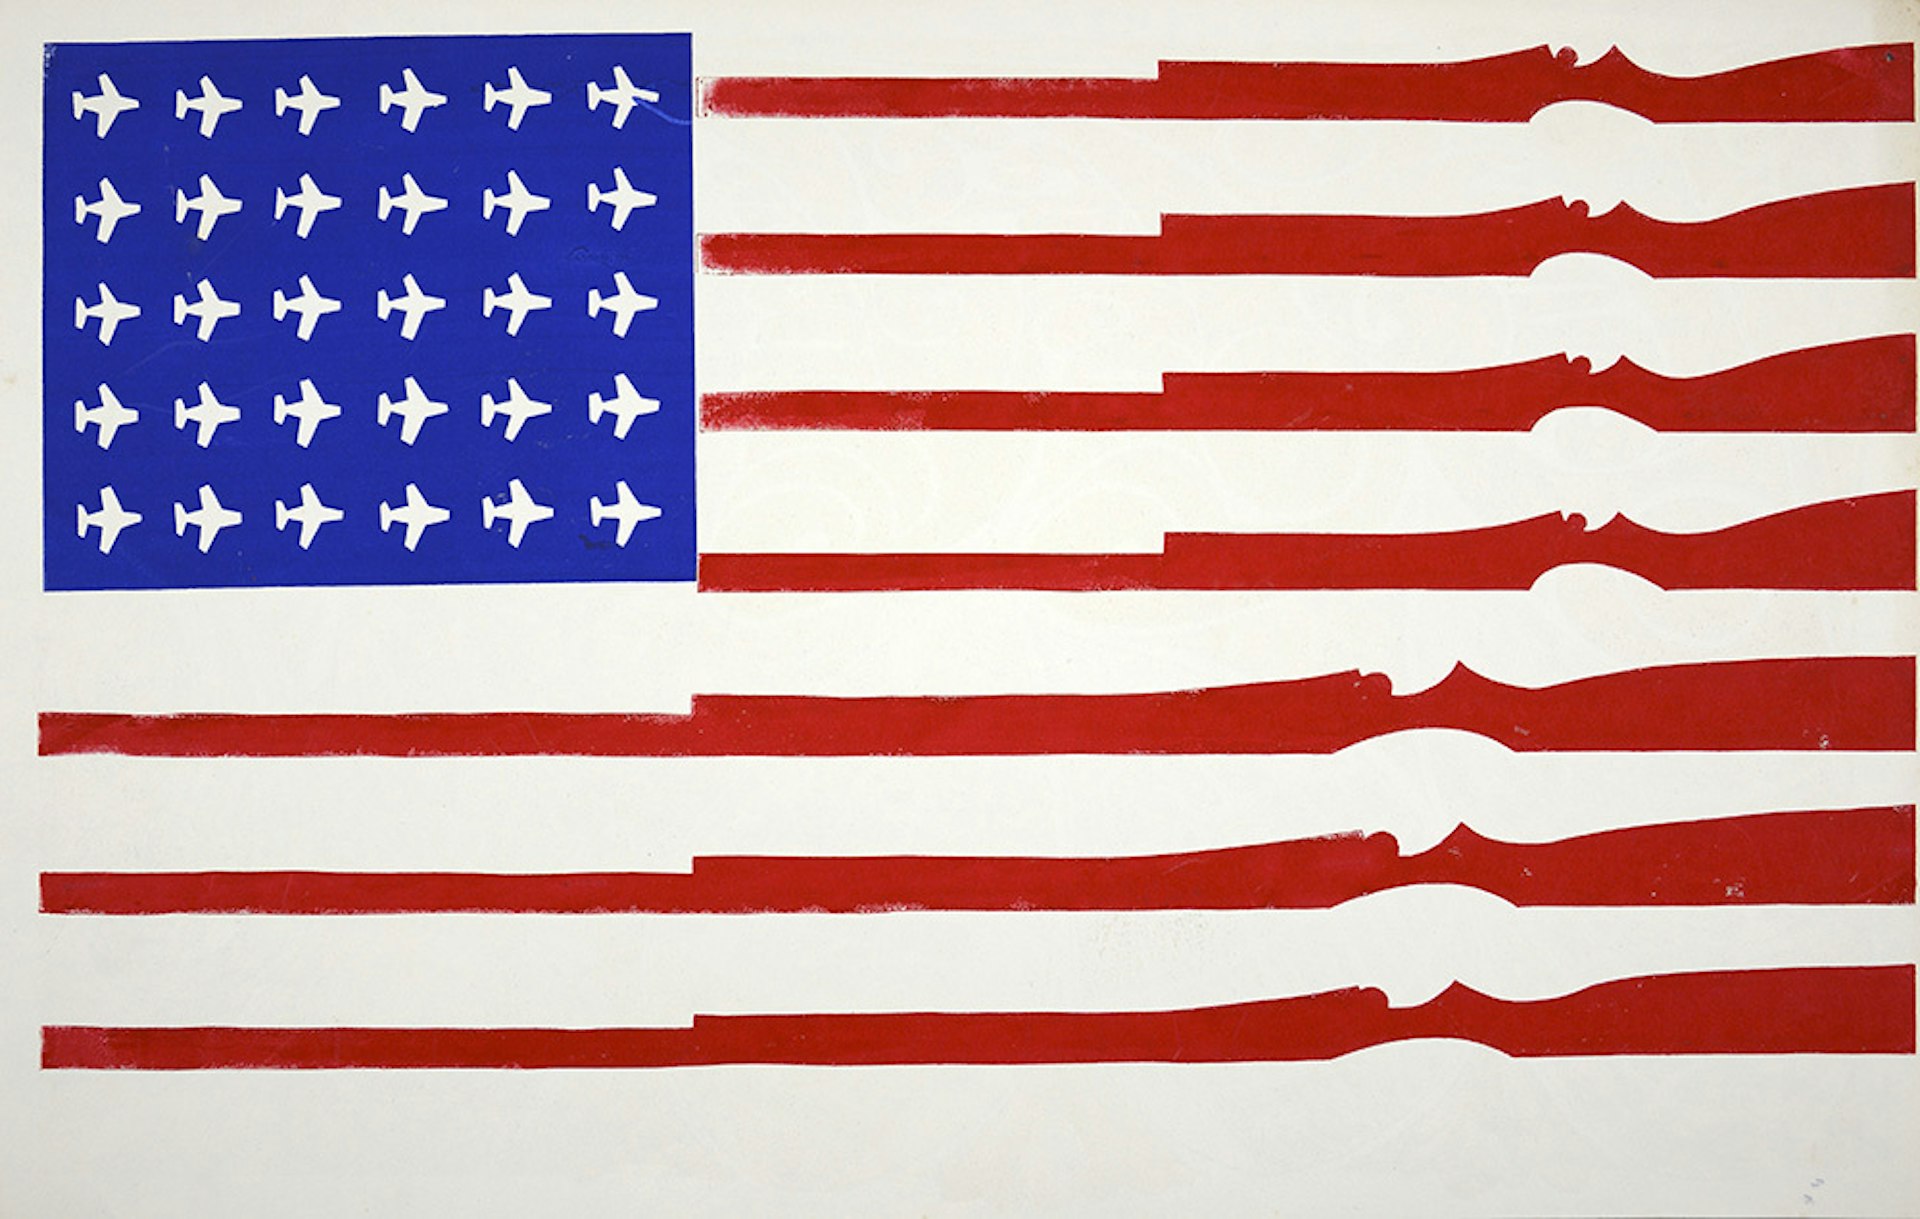 In Pictures: Arresting protest art from 1970s US student activists